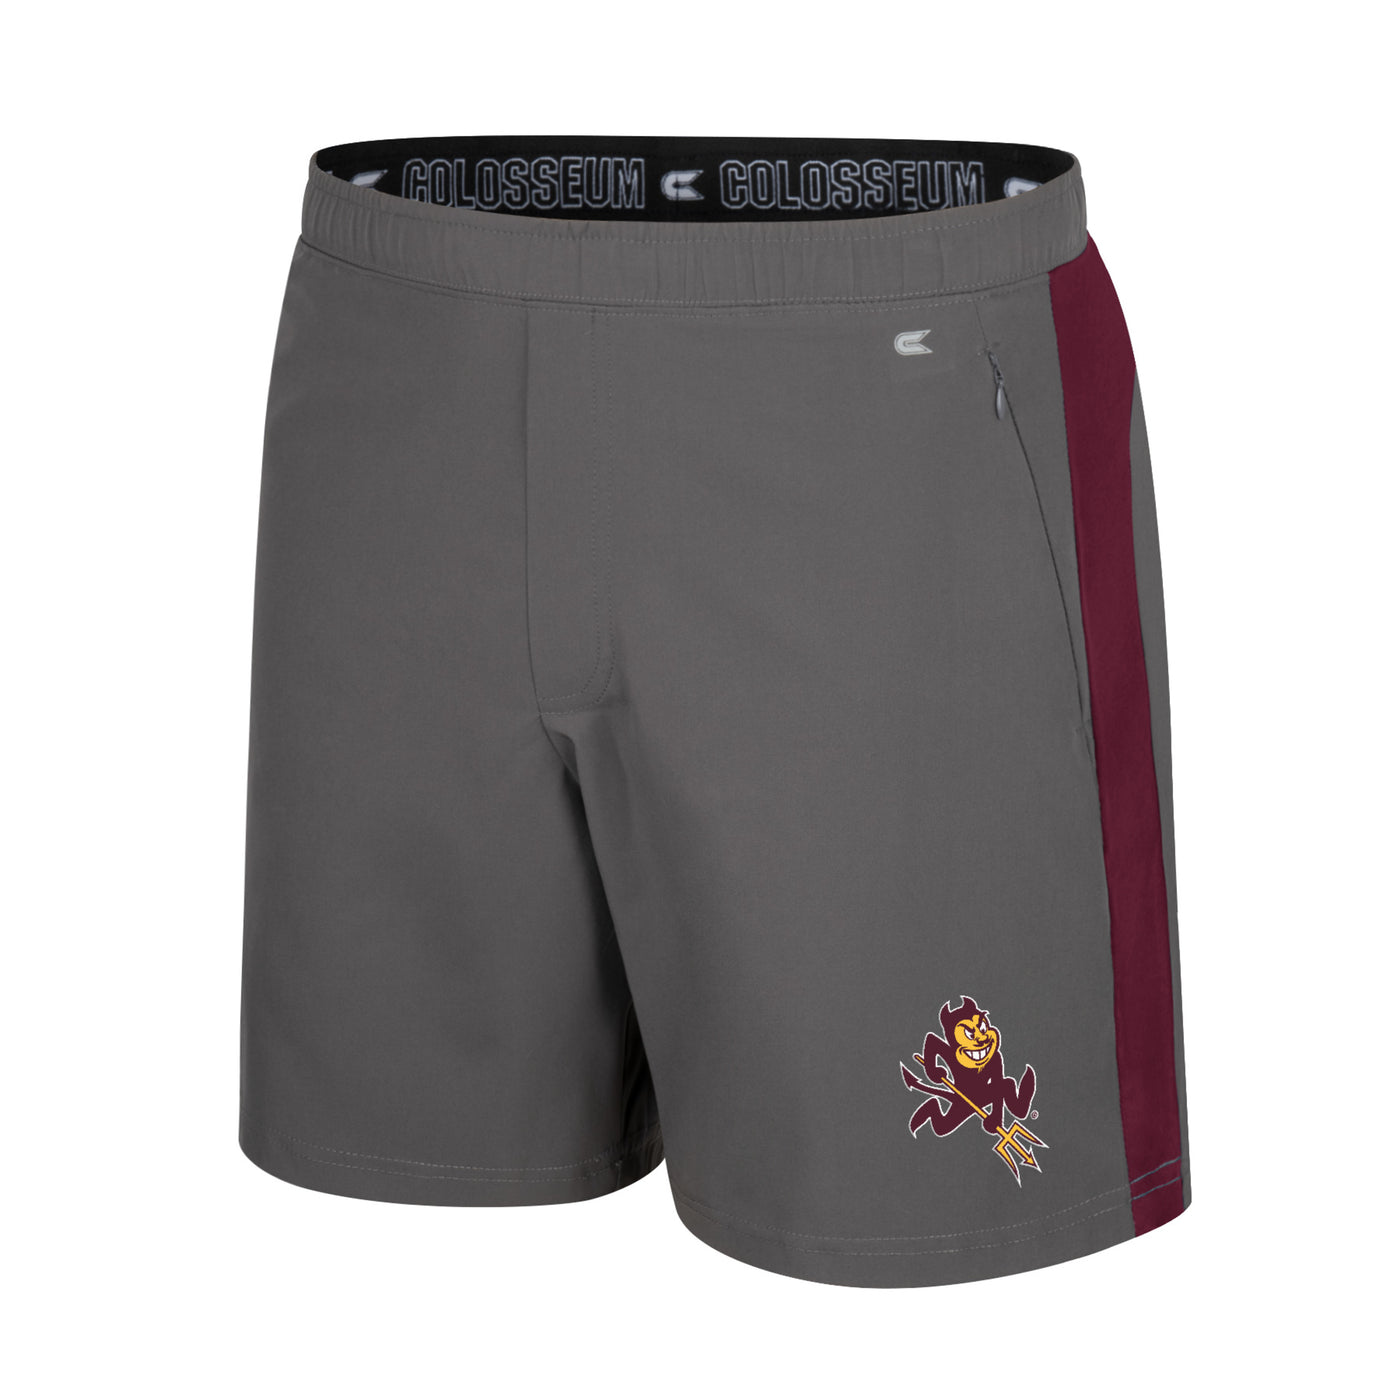 ASU gray shorts with maroon stripes on the side panel and a Sparky on the bottom left leg with zipper pockets